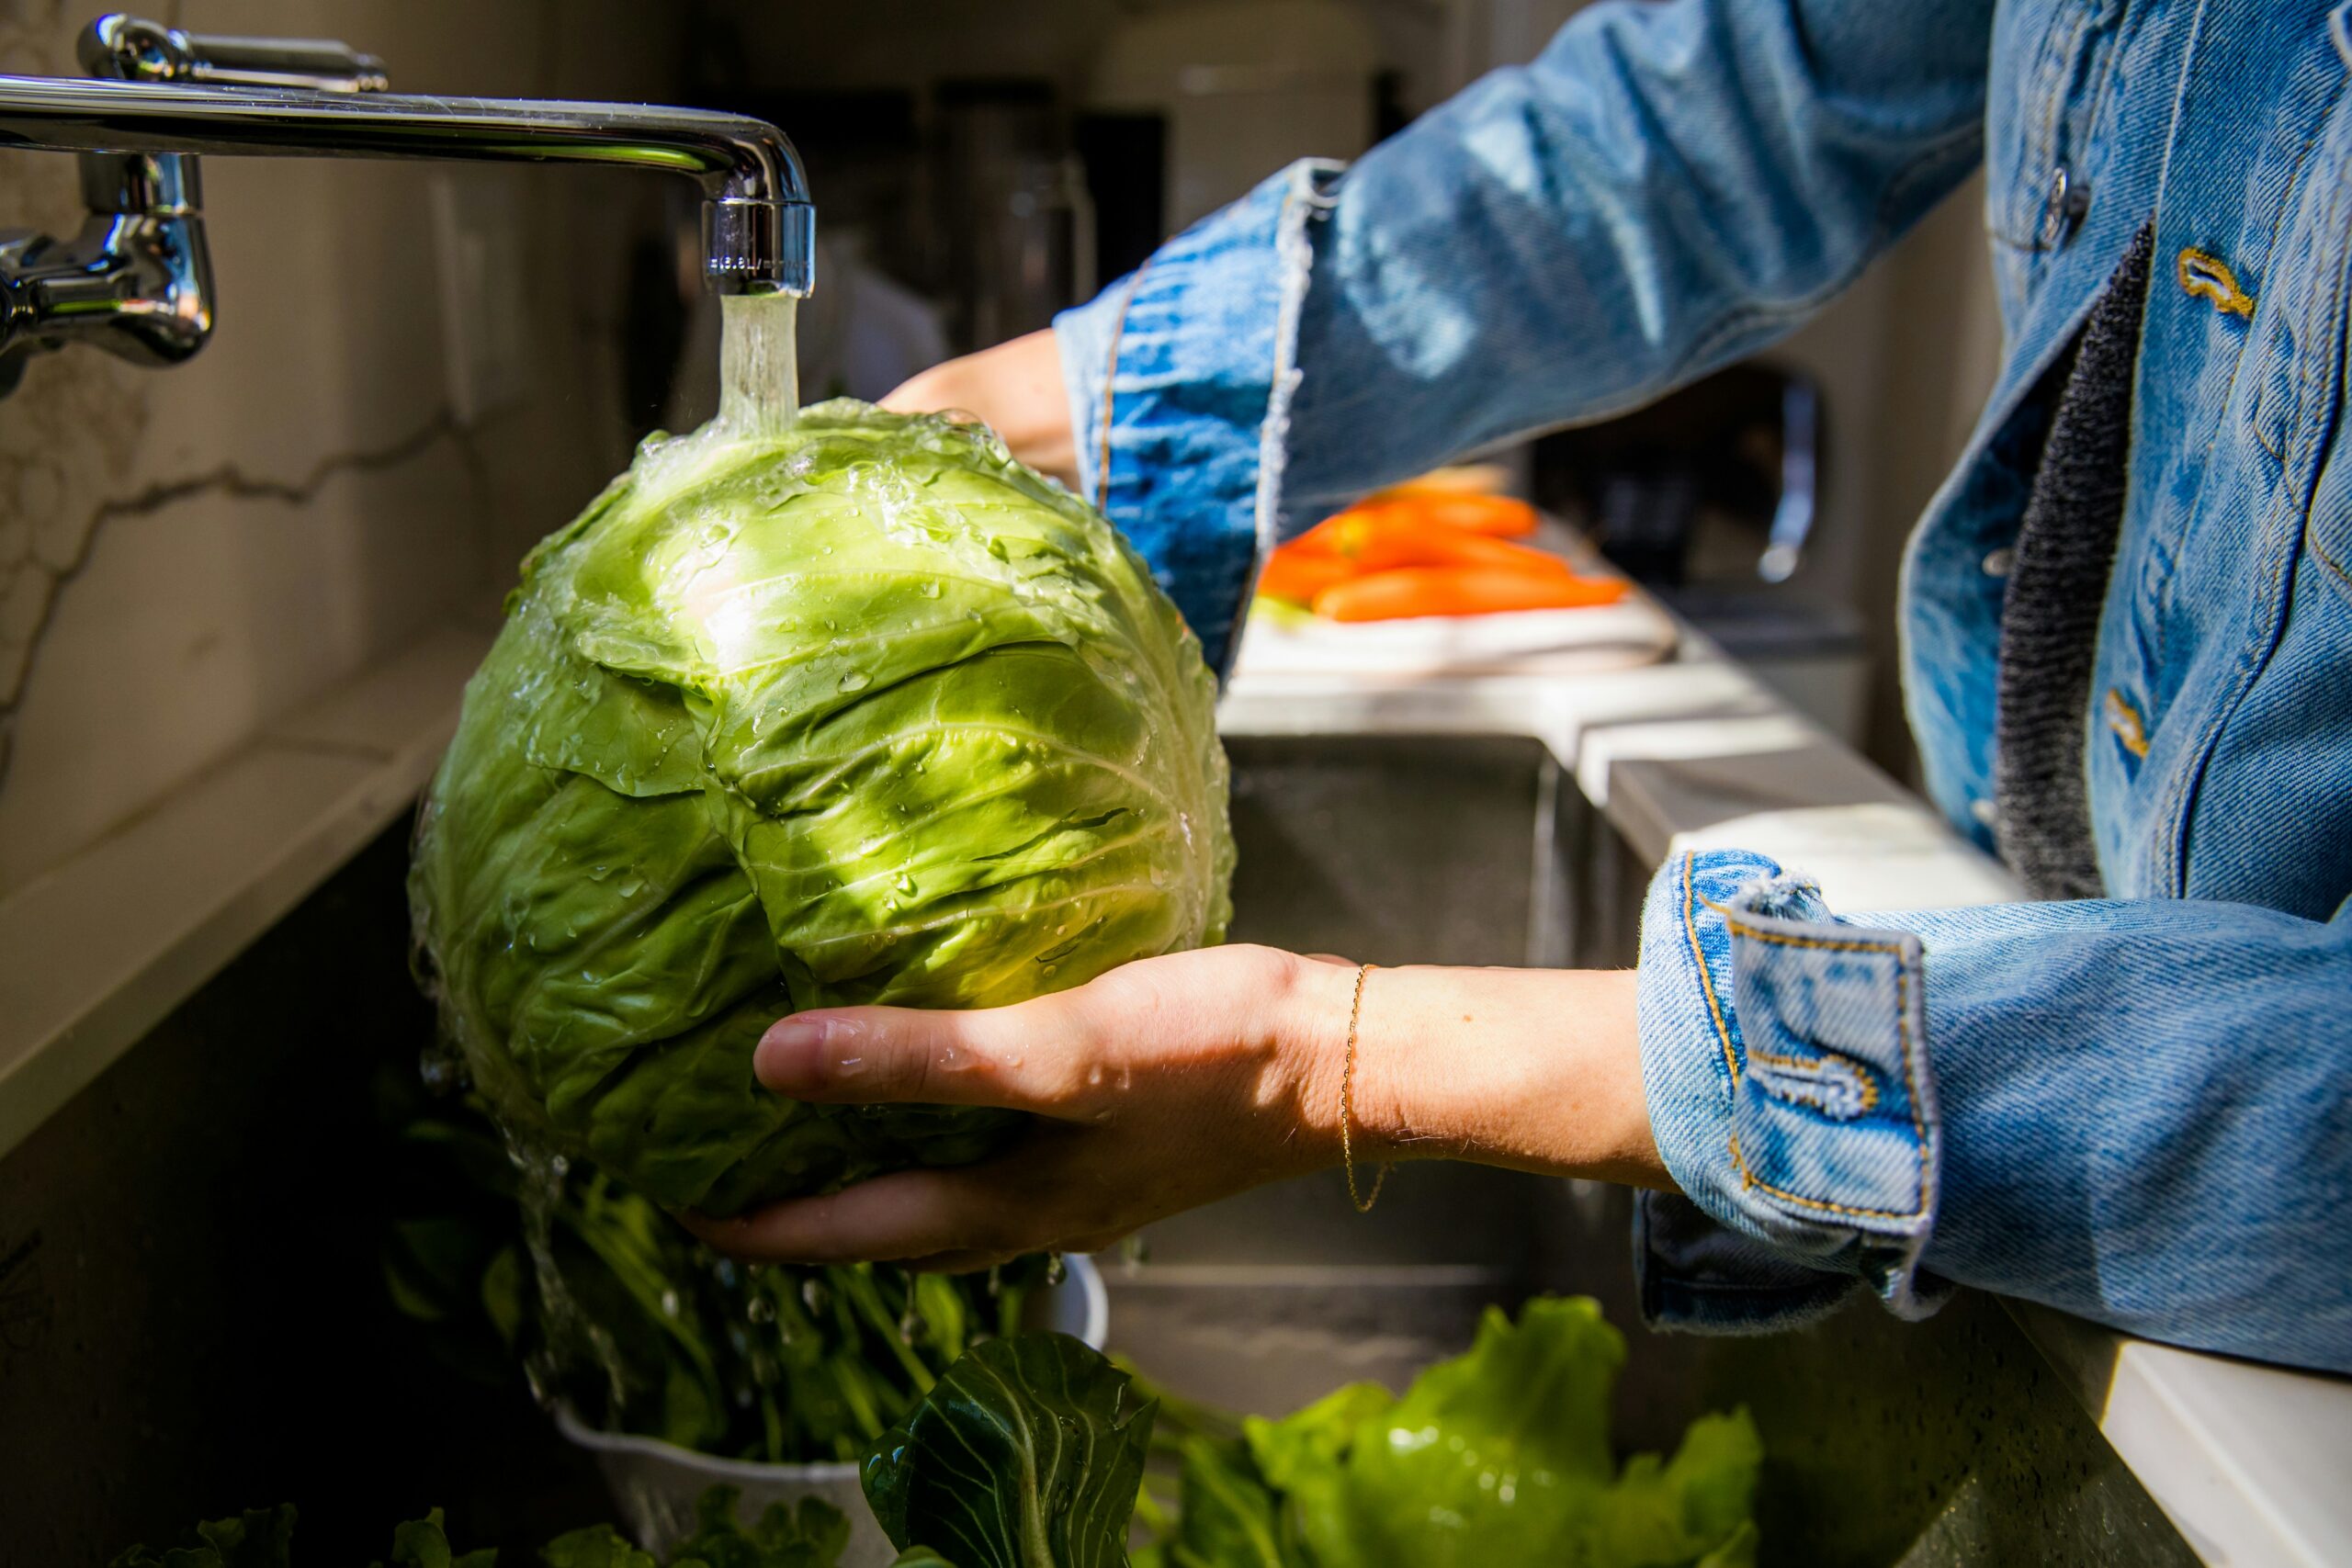 Hand rinsing a head of cabbage under a faucet.